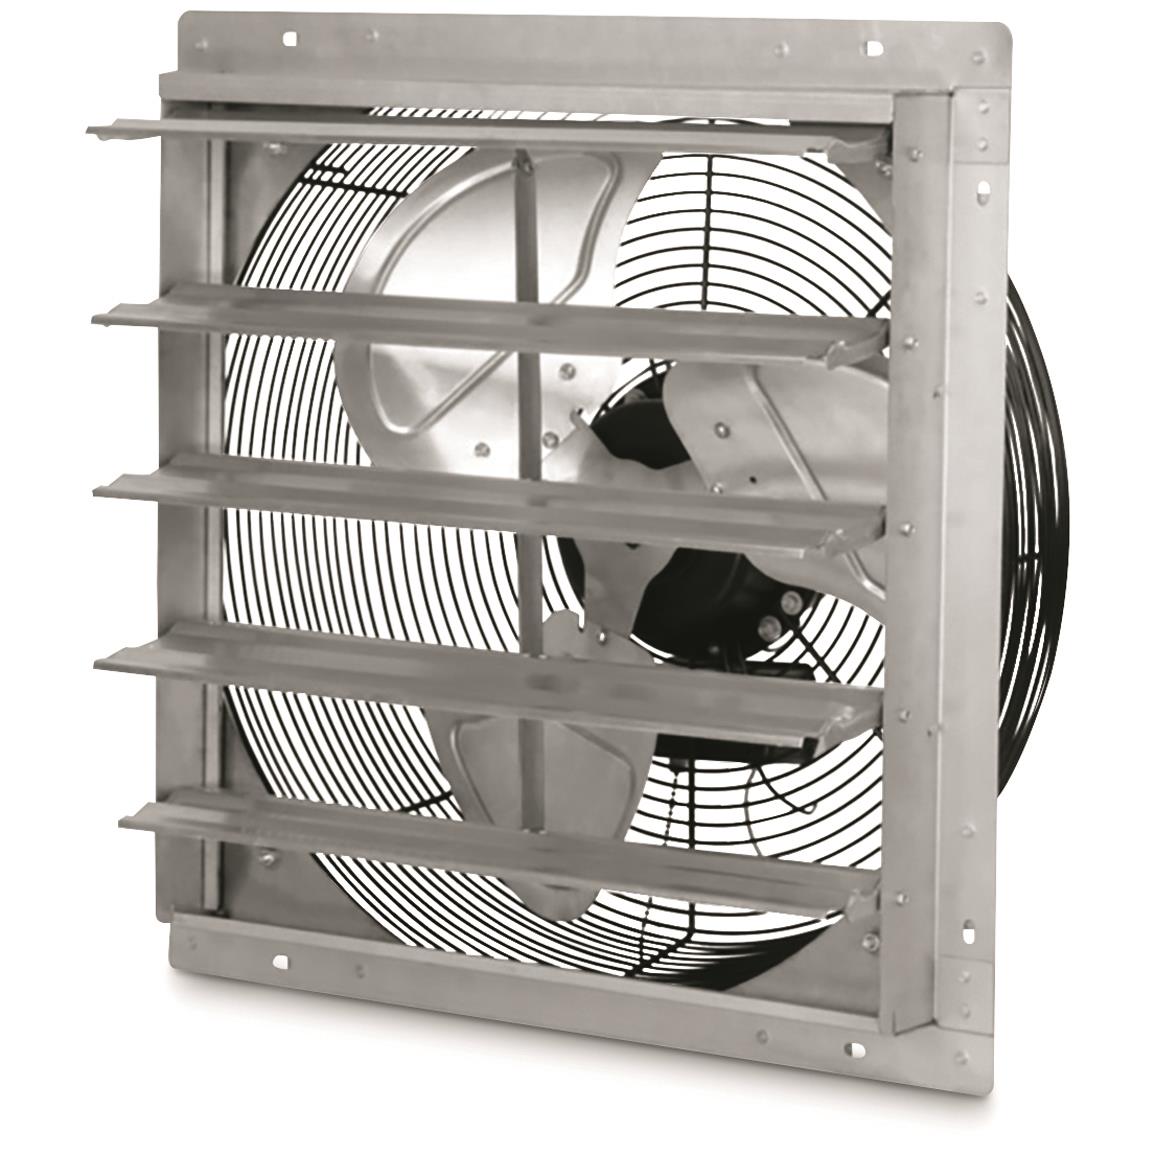 Q Standard Exhaust Fan with Shutter, 20" - 715658, Air Conditioners